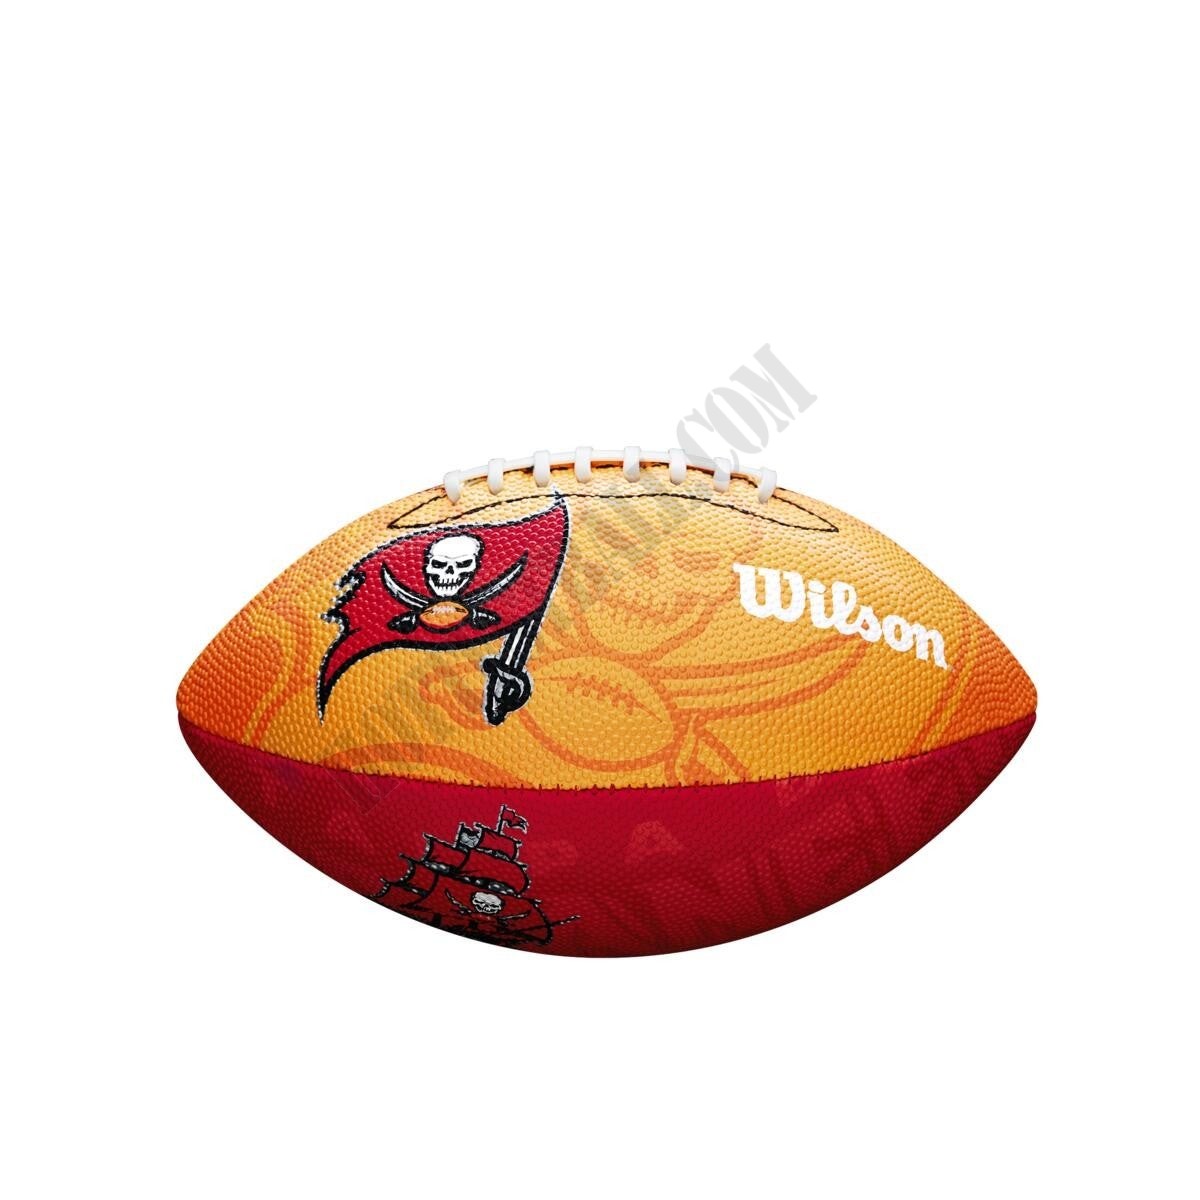 NFL Team Tailgate Football - Tampa Bay Buccaneers ● Wilson Promotions - -0